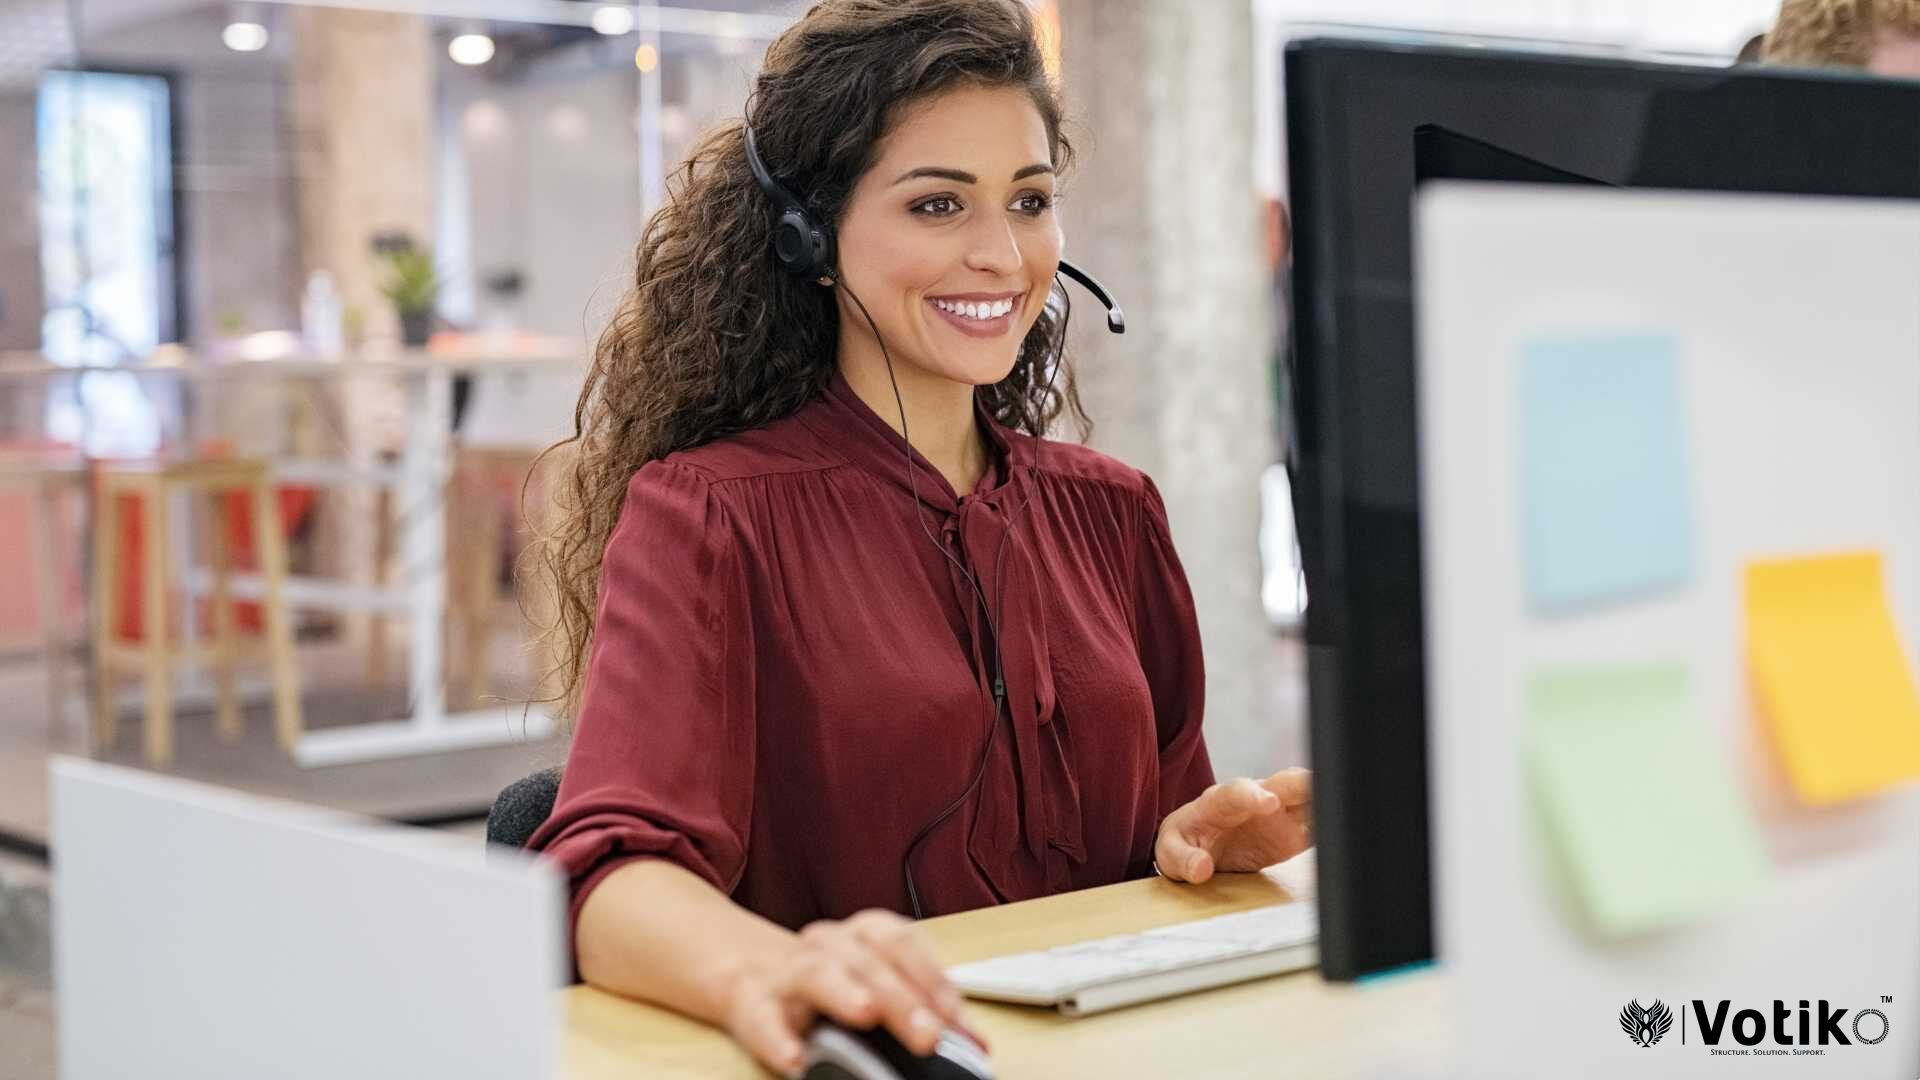 Reasons Why Votiko Customer Service Should Be a Career for Everyone